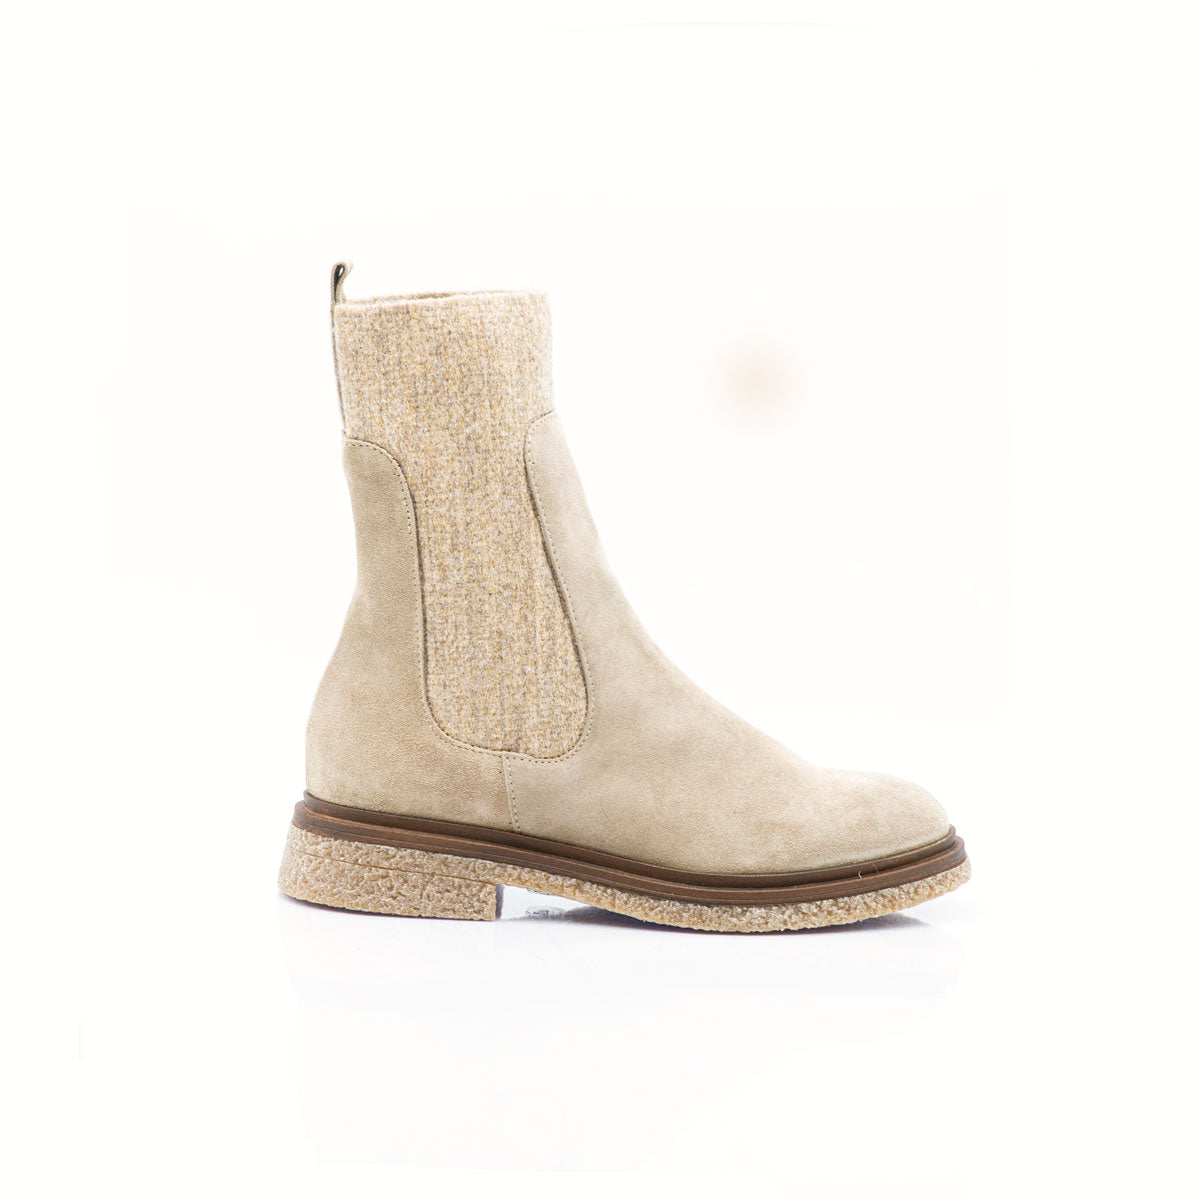 Figini- Taupe Ankle Boots, with lug sole and a Wool Leg detail